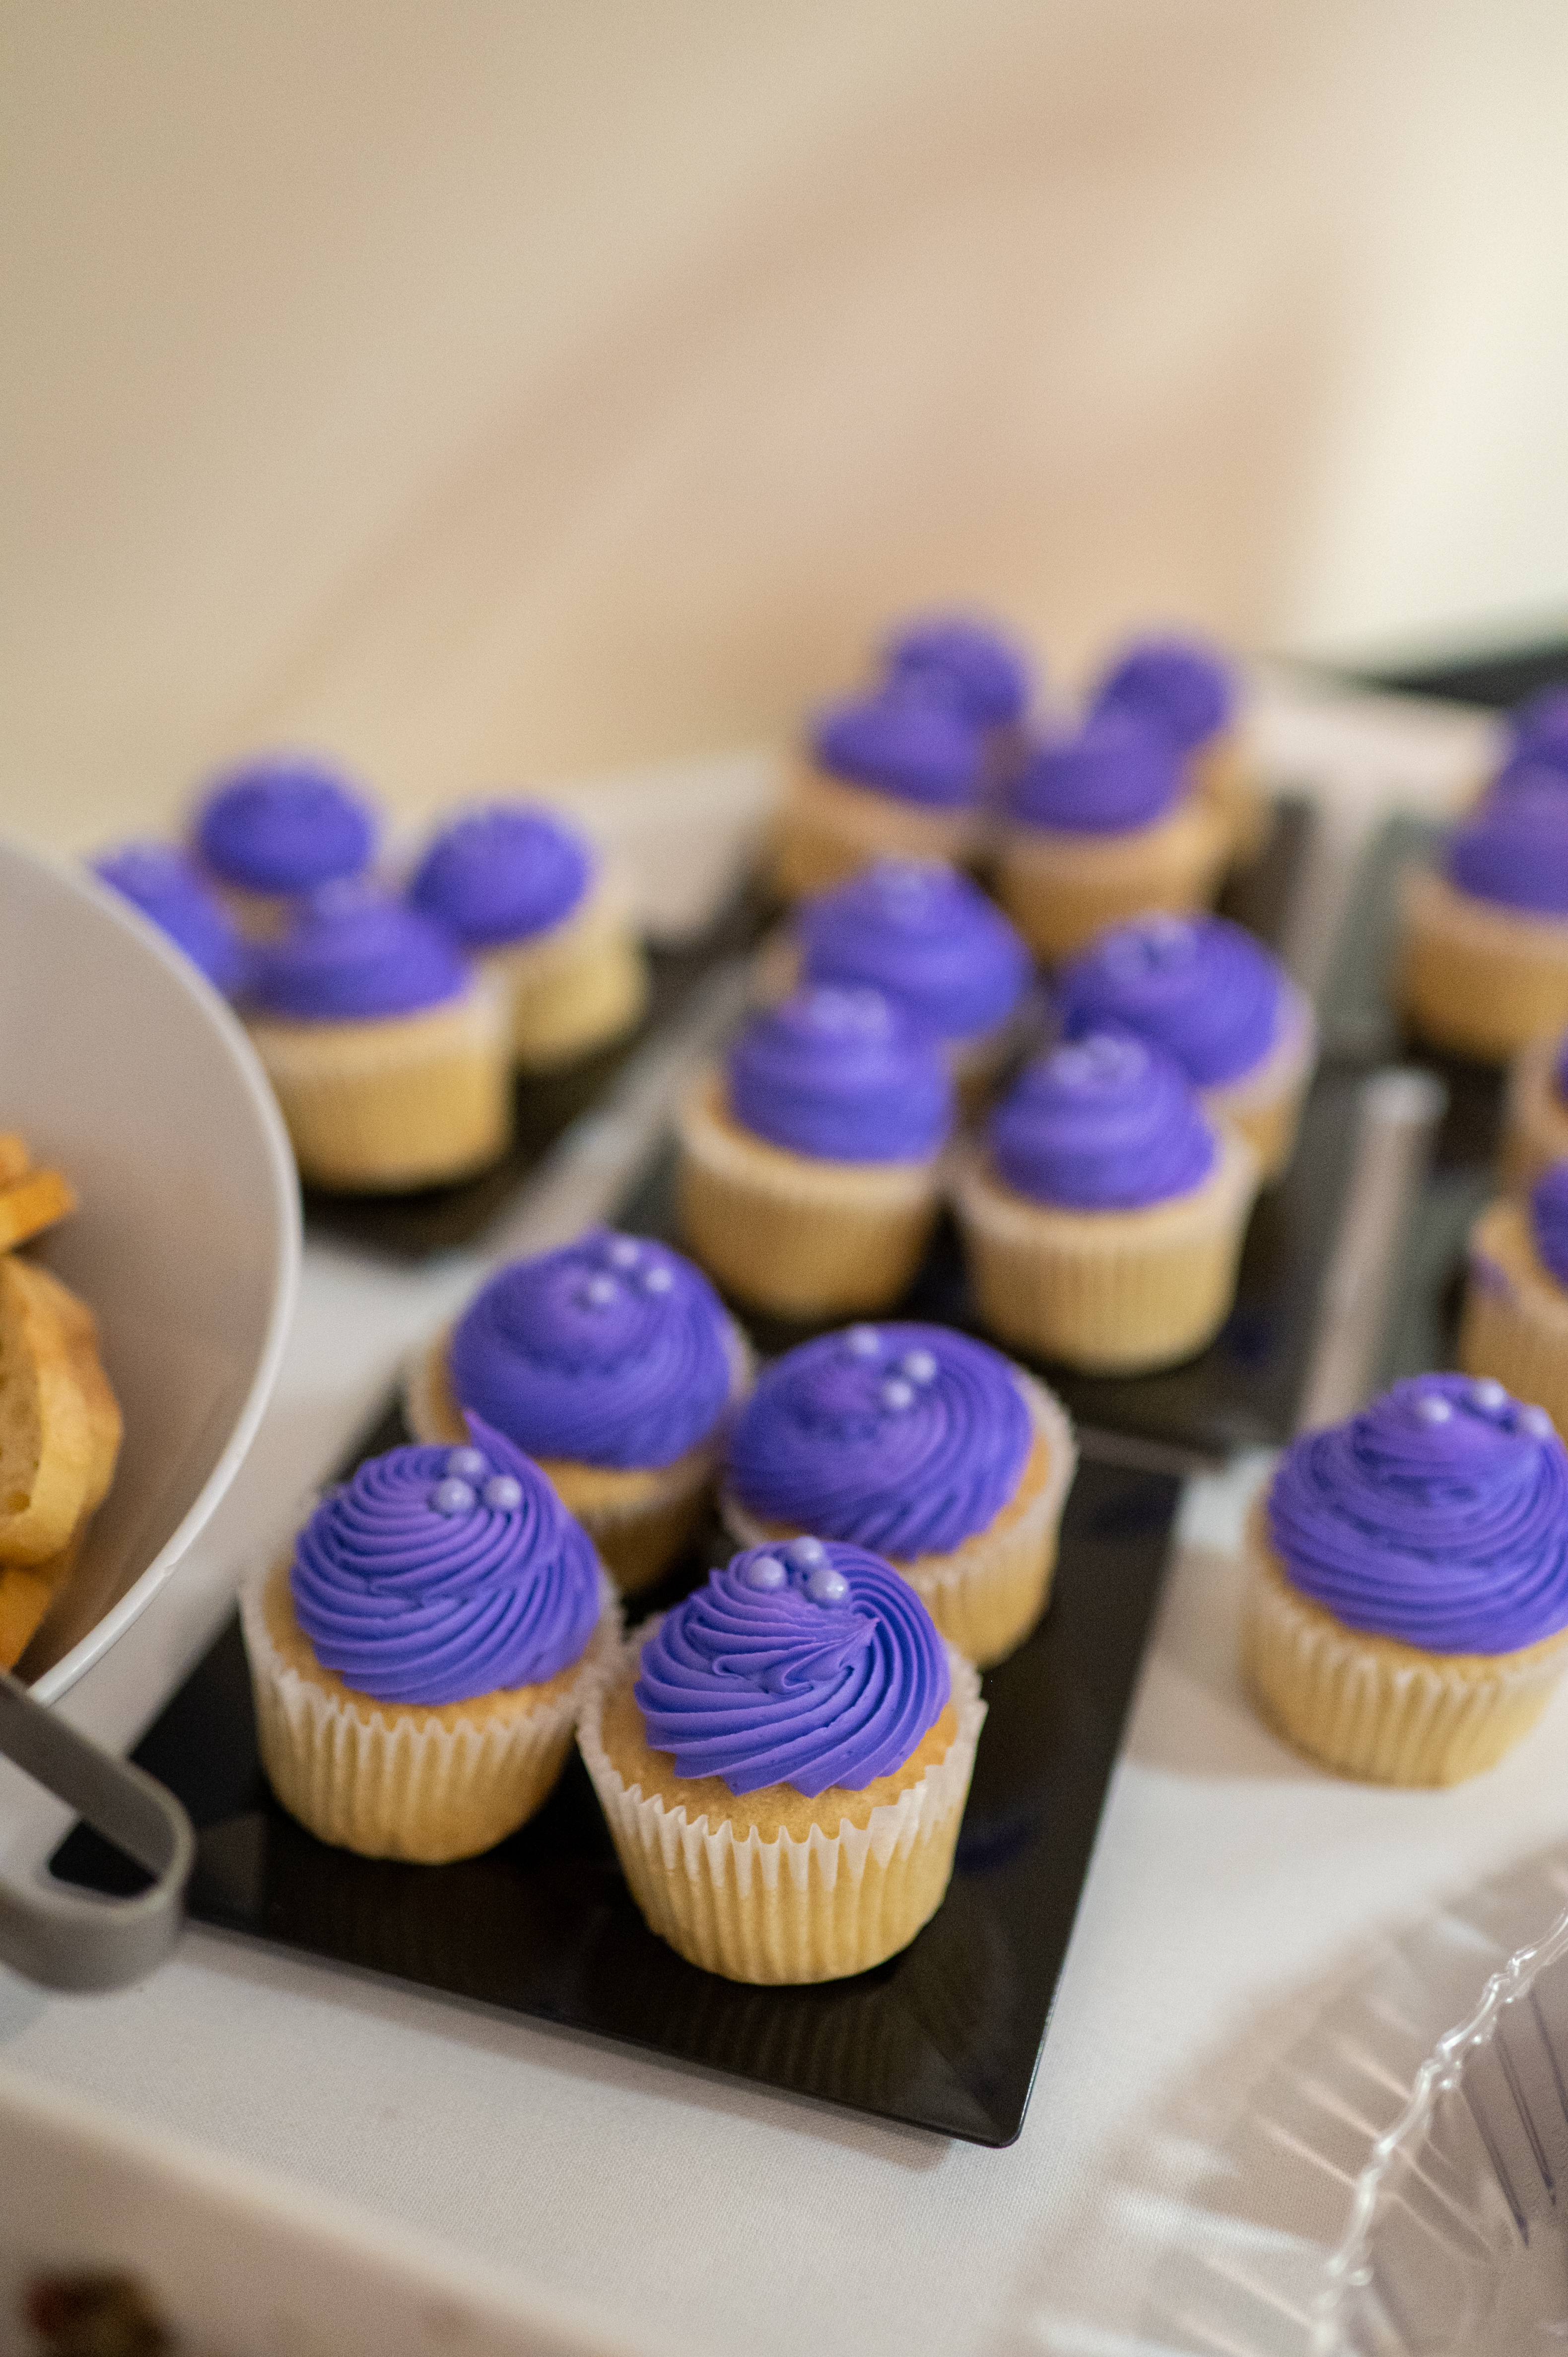 Trays of cupcakes with purple frosting